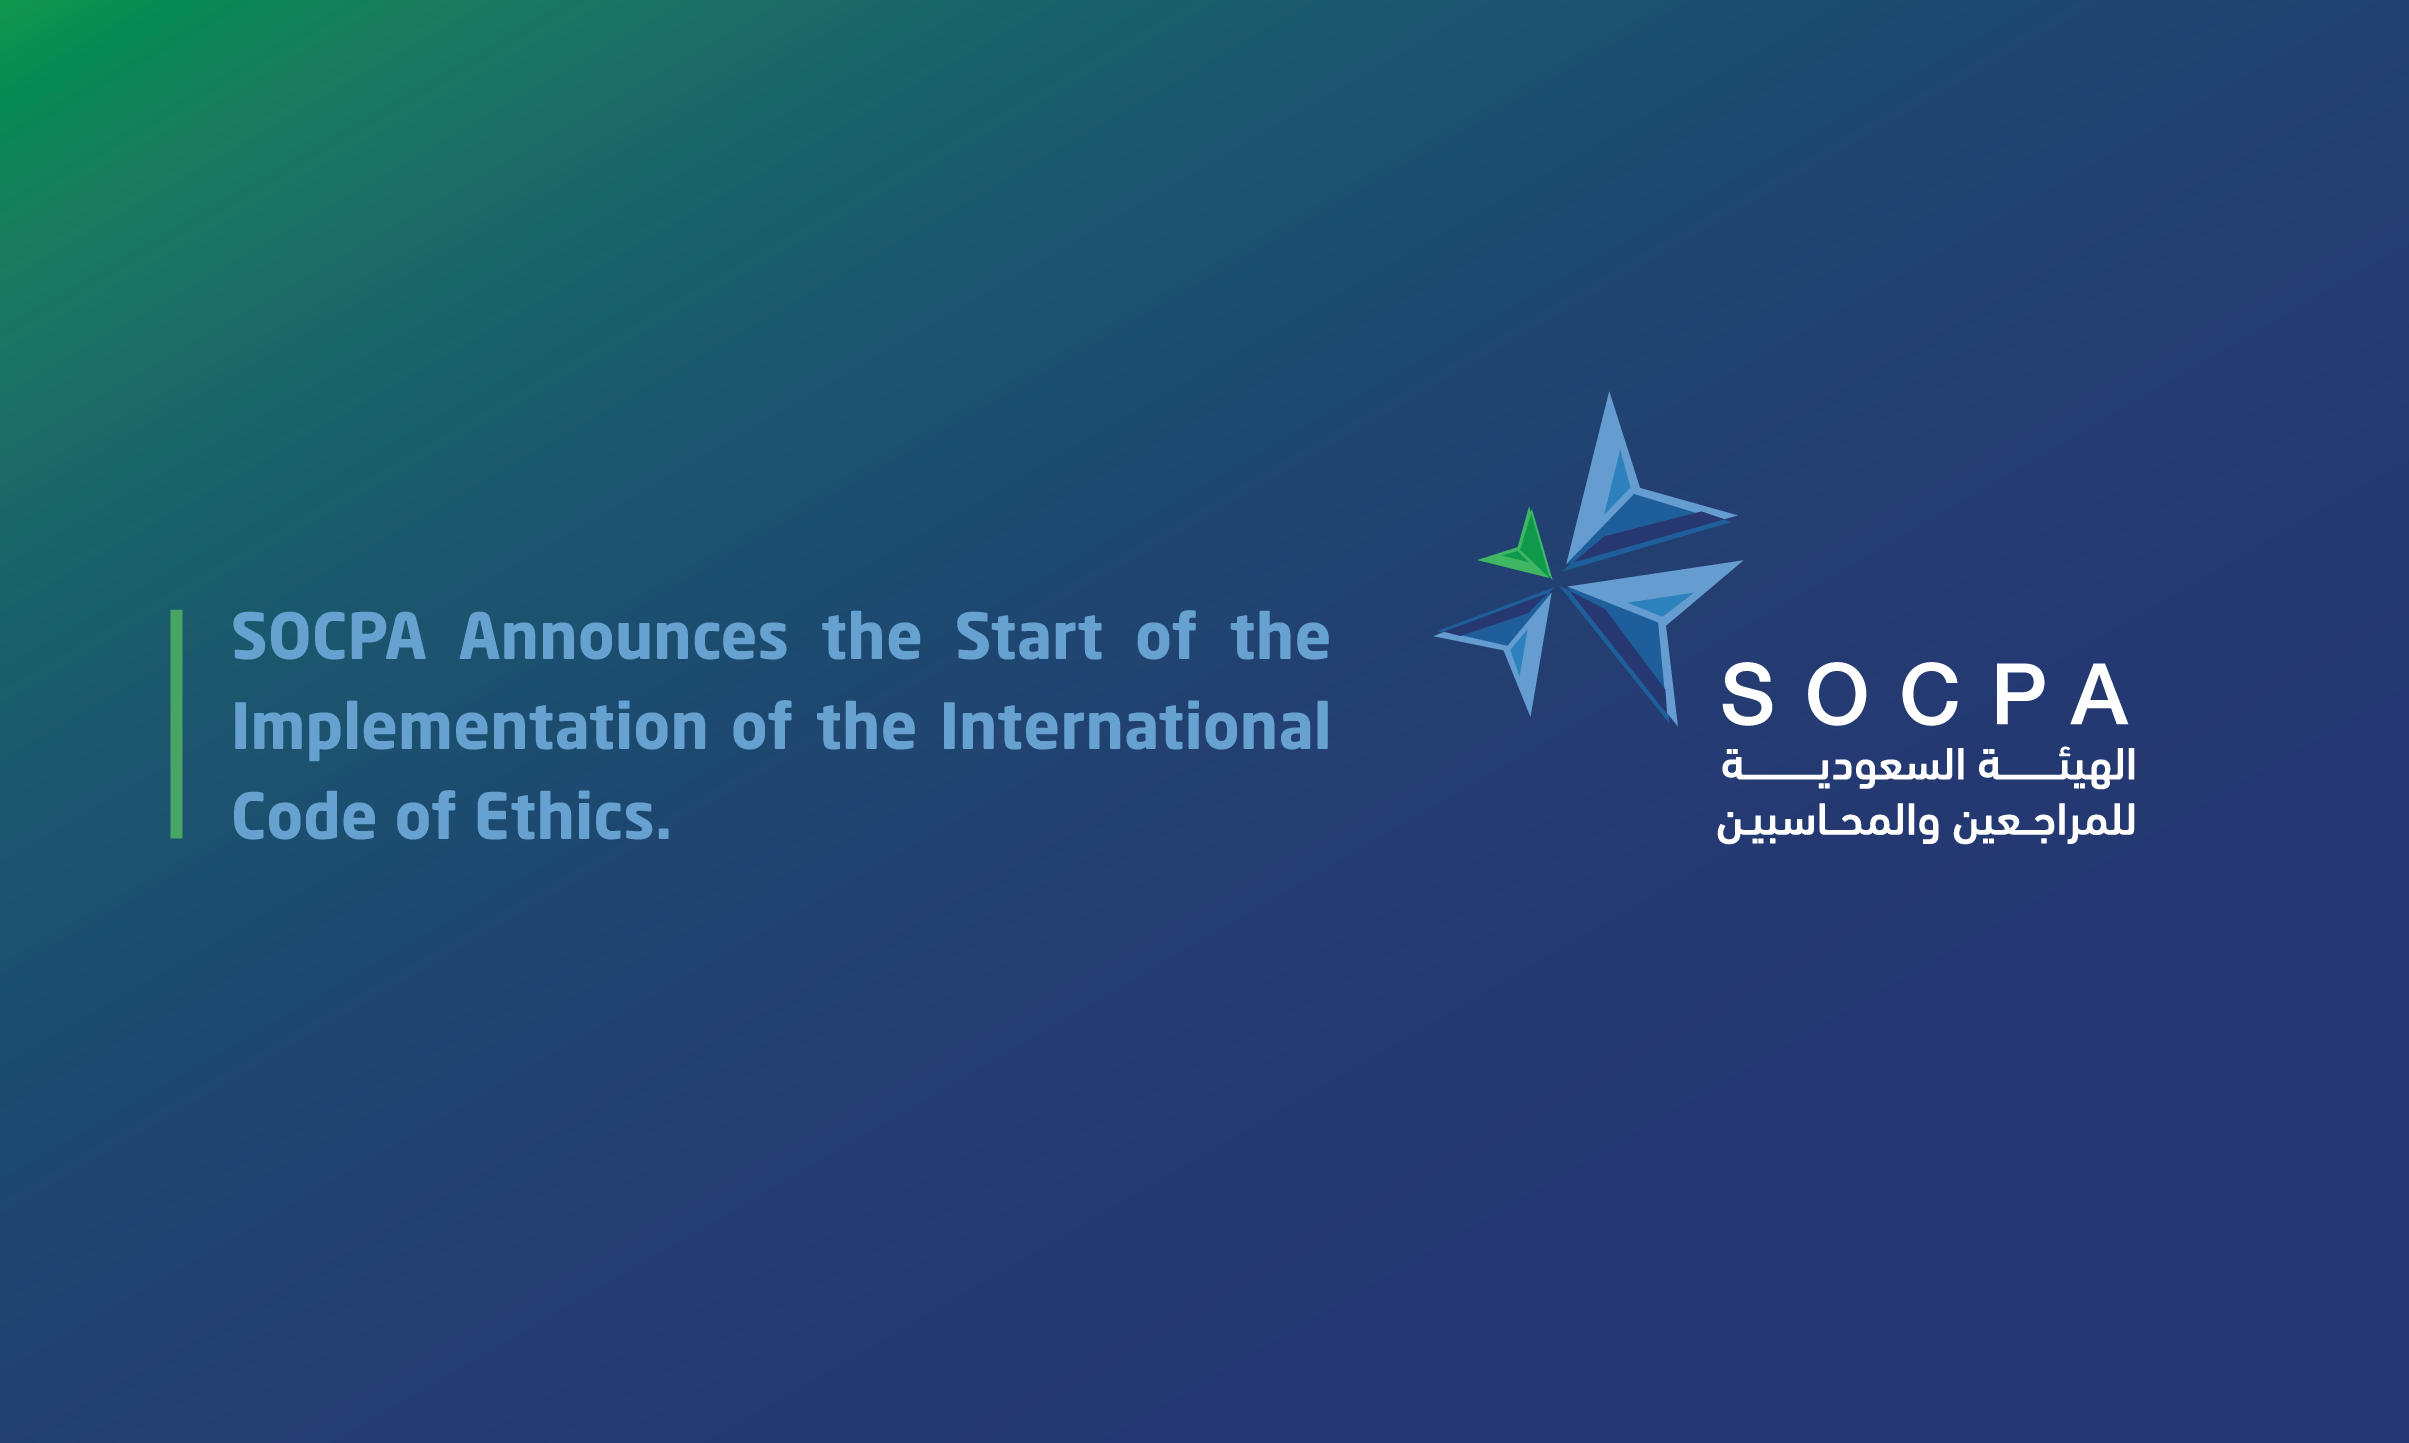 SOCPA Announces the Start of the Implementation of the International Code of Ethics